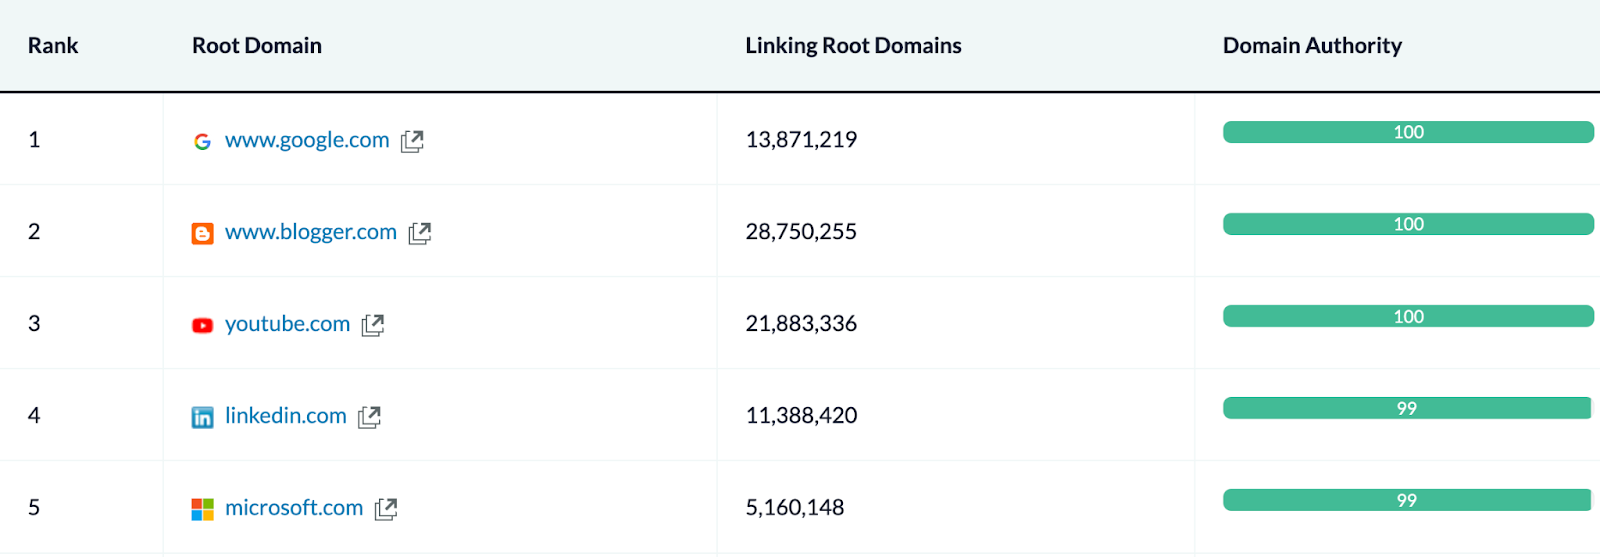 Top five ranking domains on Google